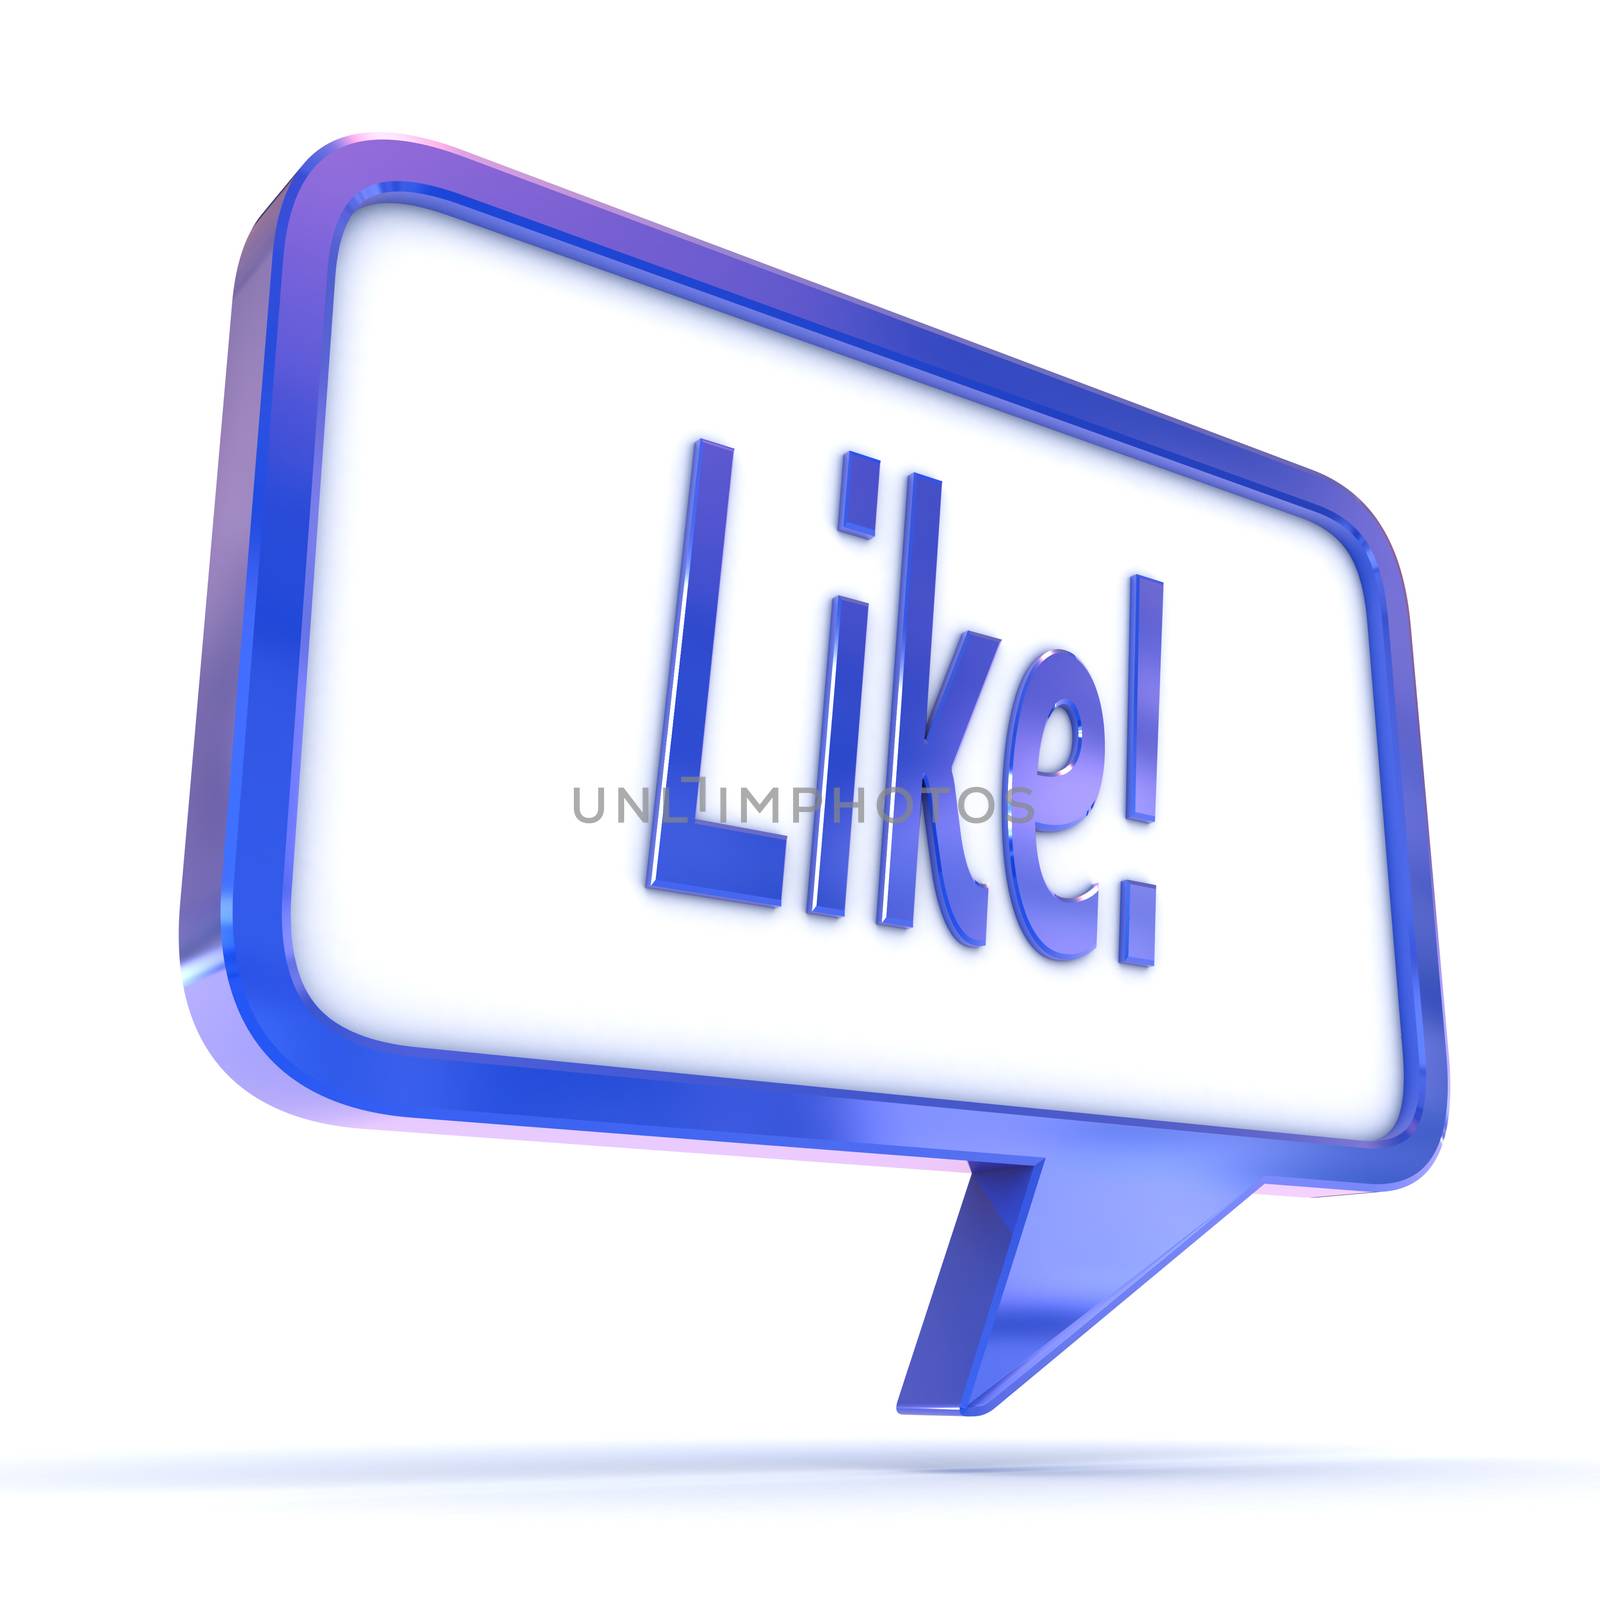 Speech Bubble showing "Like" as used in social networks by head-off